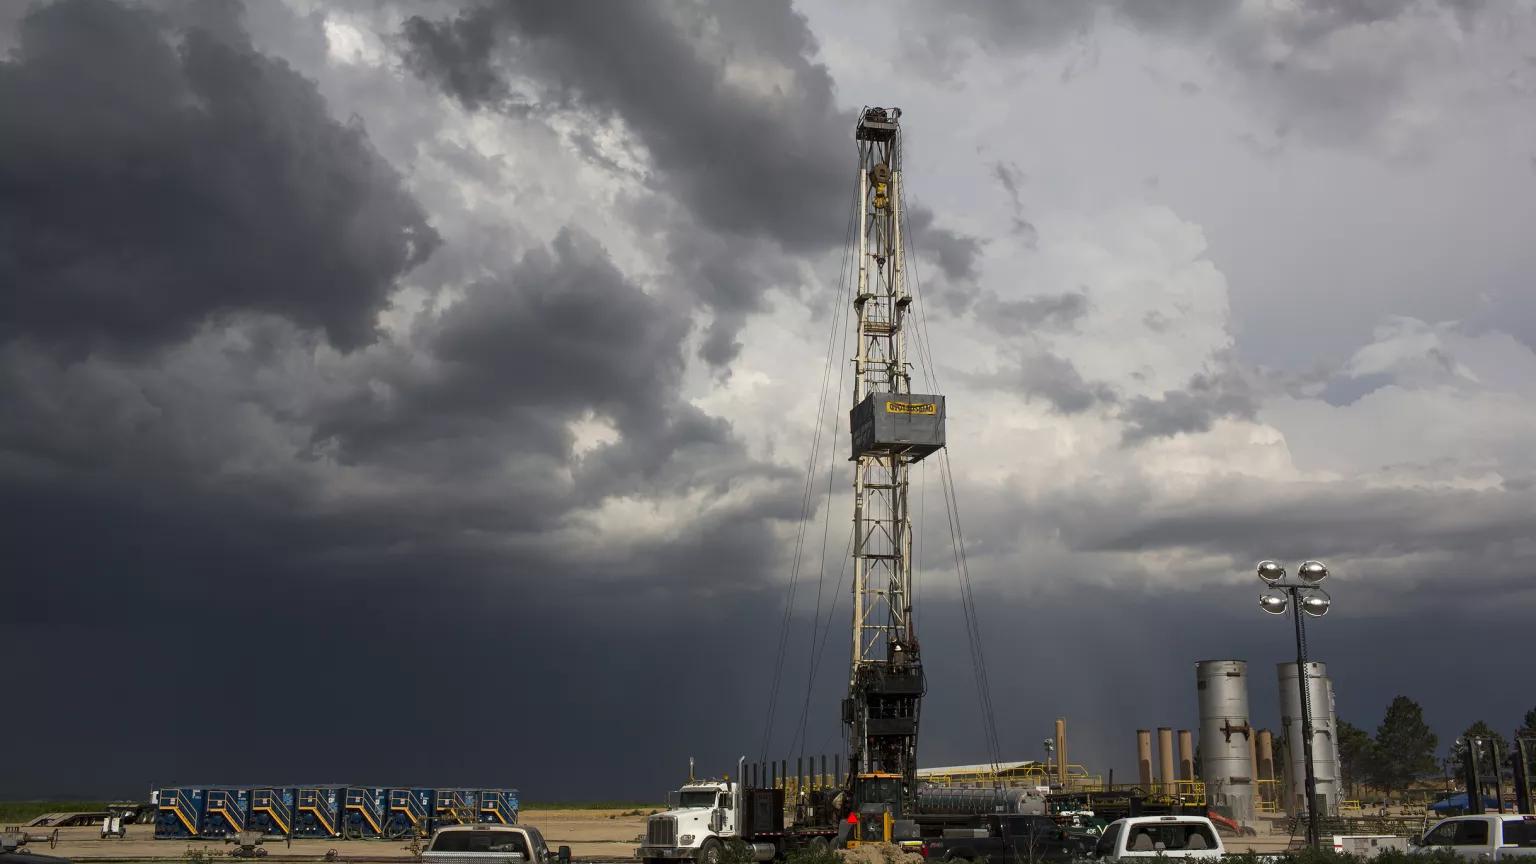 A rig rises from a field with dark gray clouds on the horizon